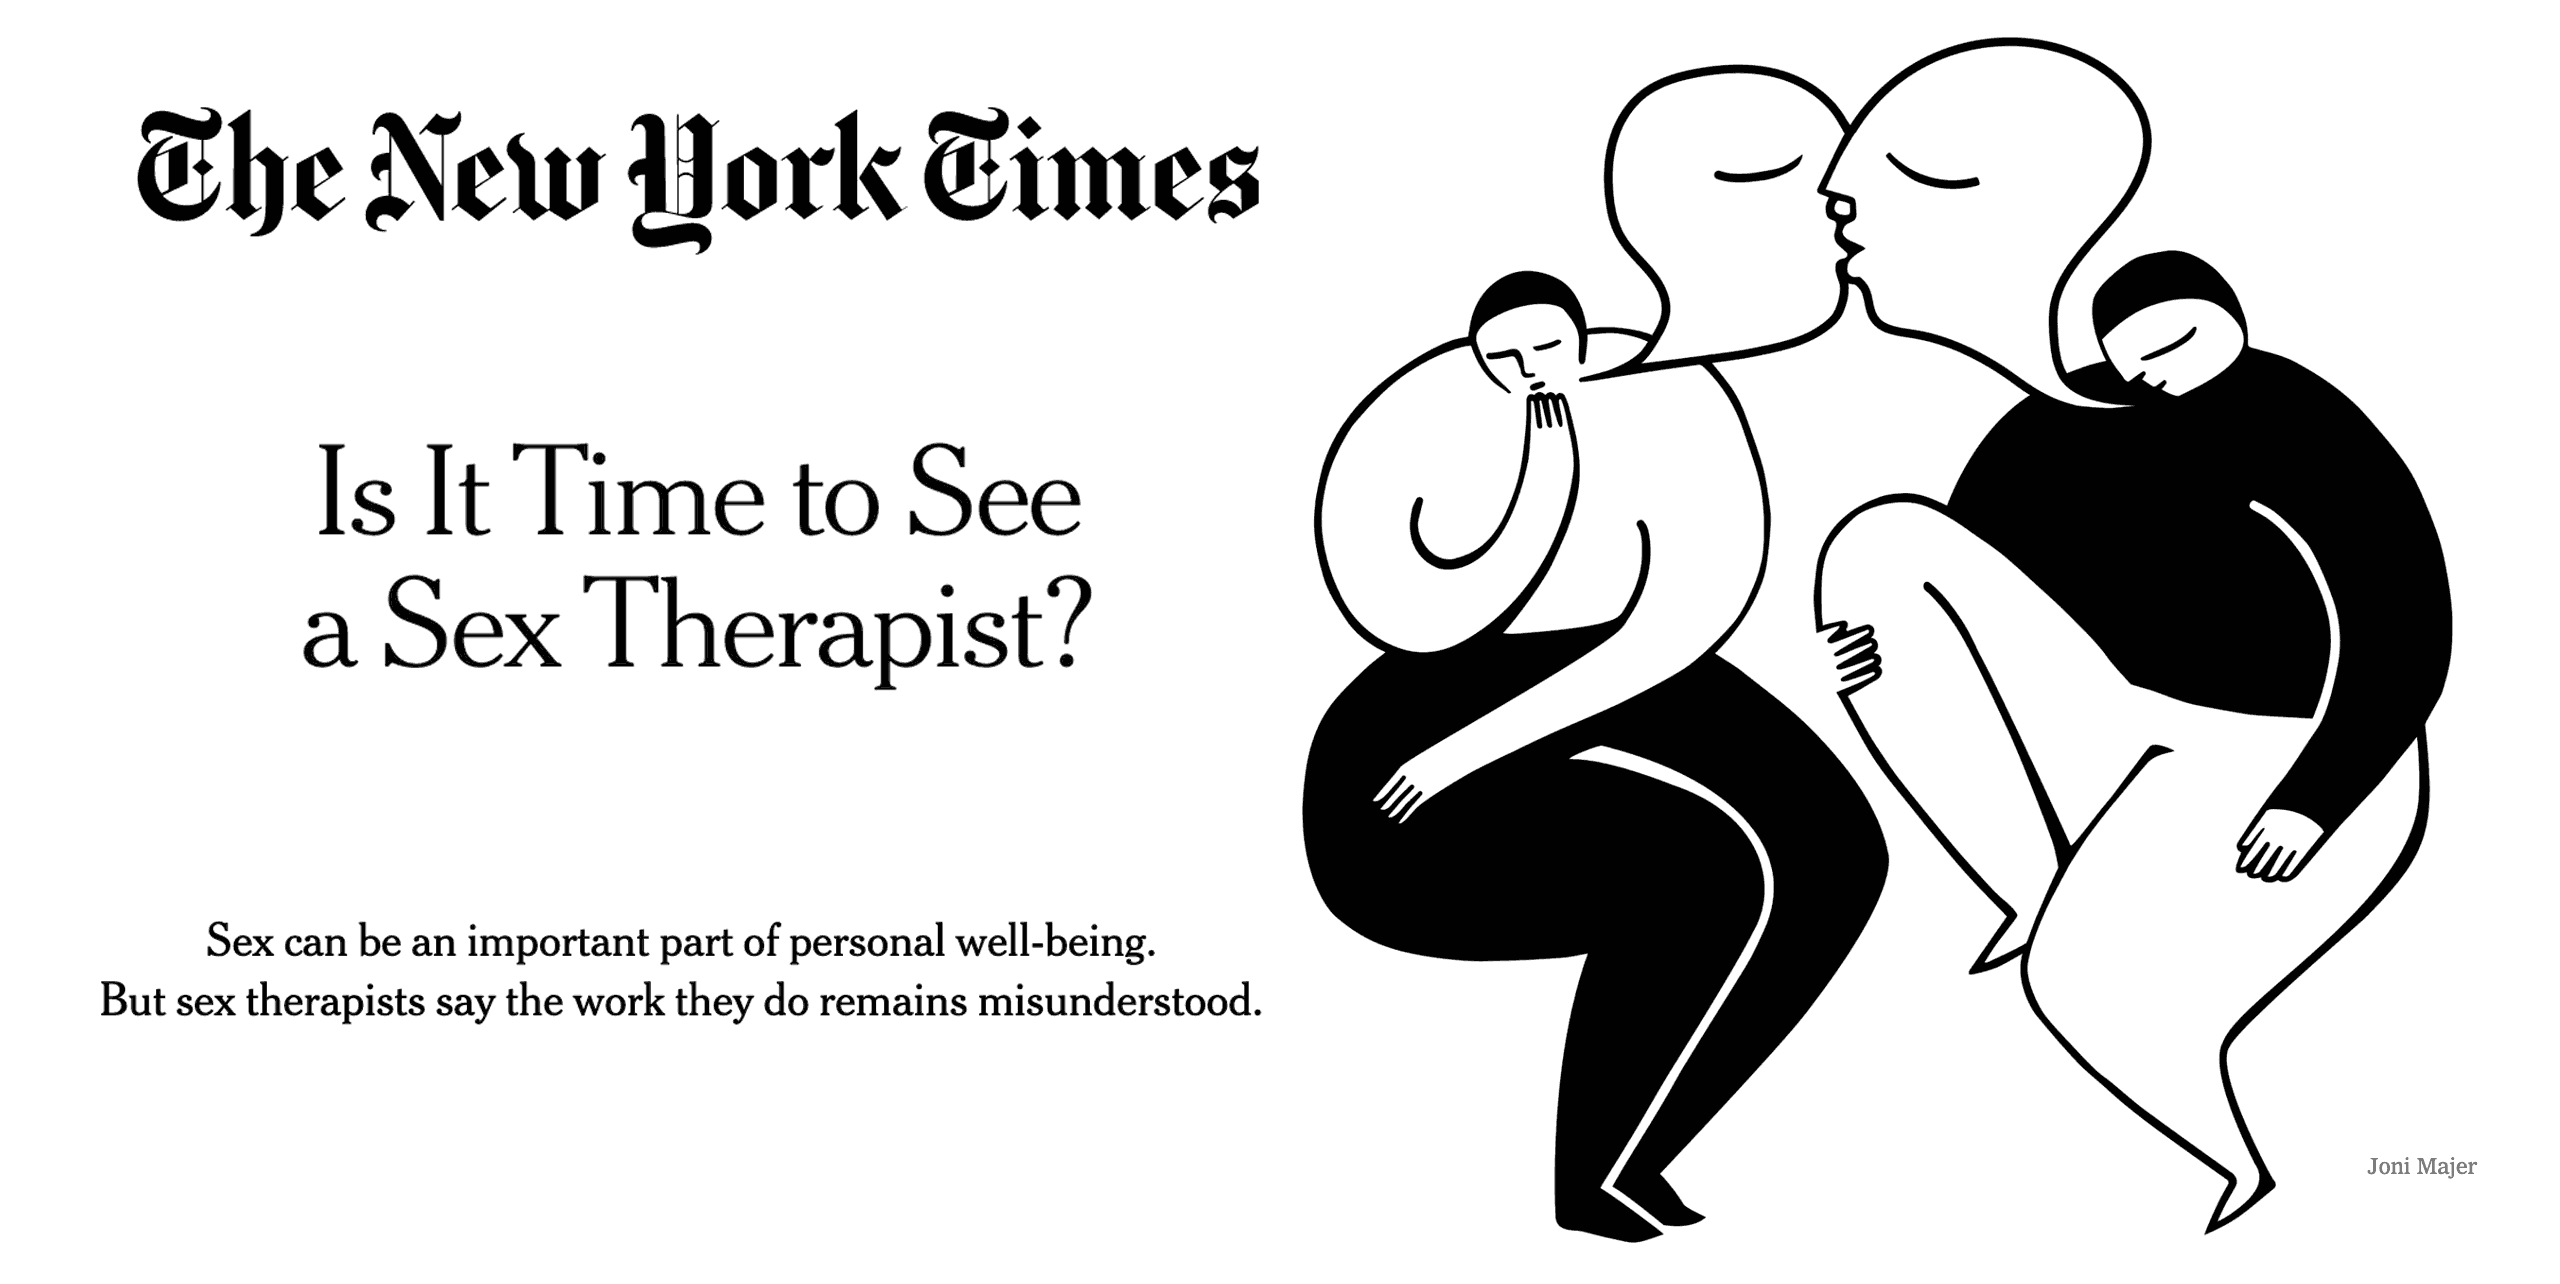 New York Times logo and illustration of couple turning away from one another while imagining kissing. Headline: Is It Time to See a Sex Therapist? Subheading: Sex can be an important part of personal well-being. But sex therapists say the work they do remains misunderstood.